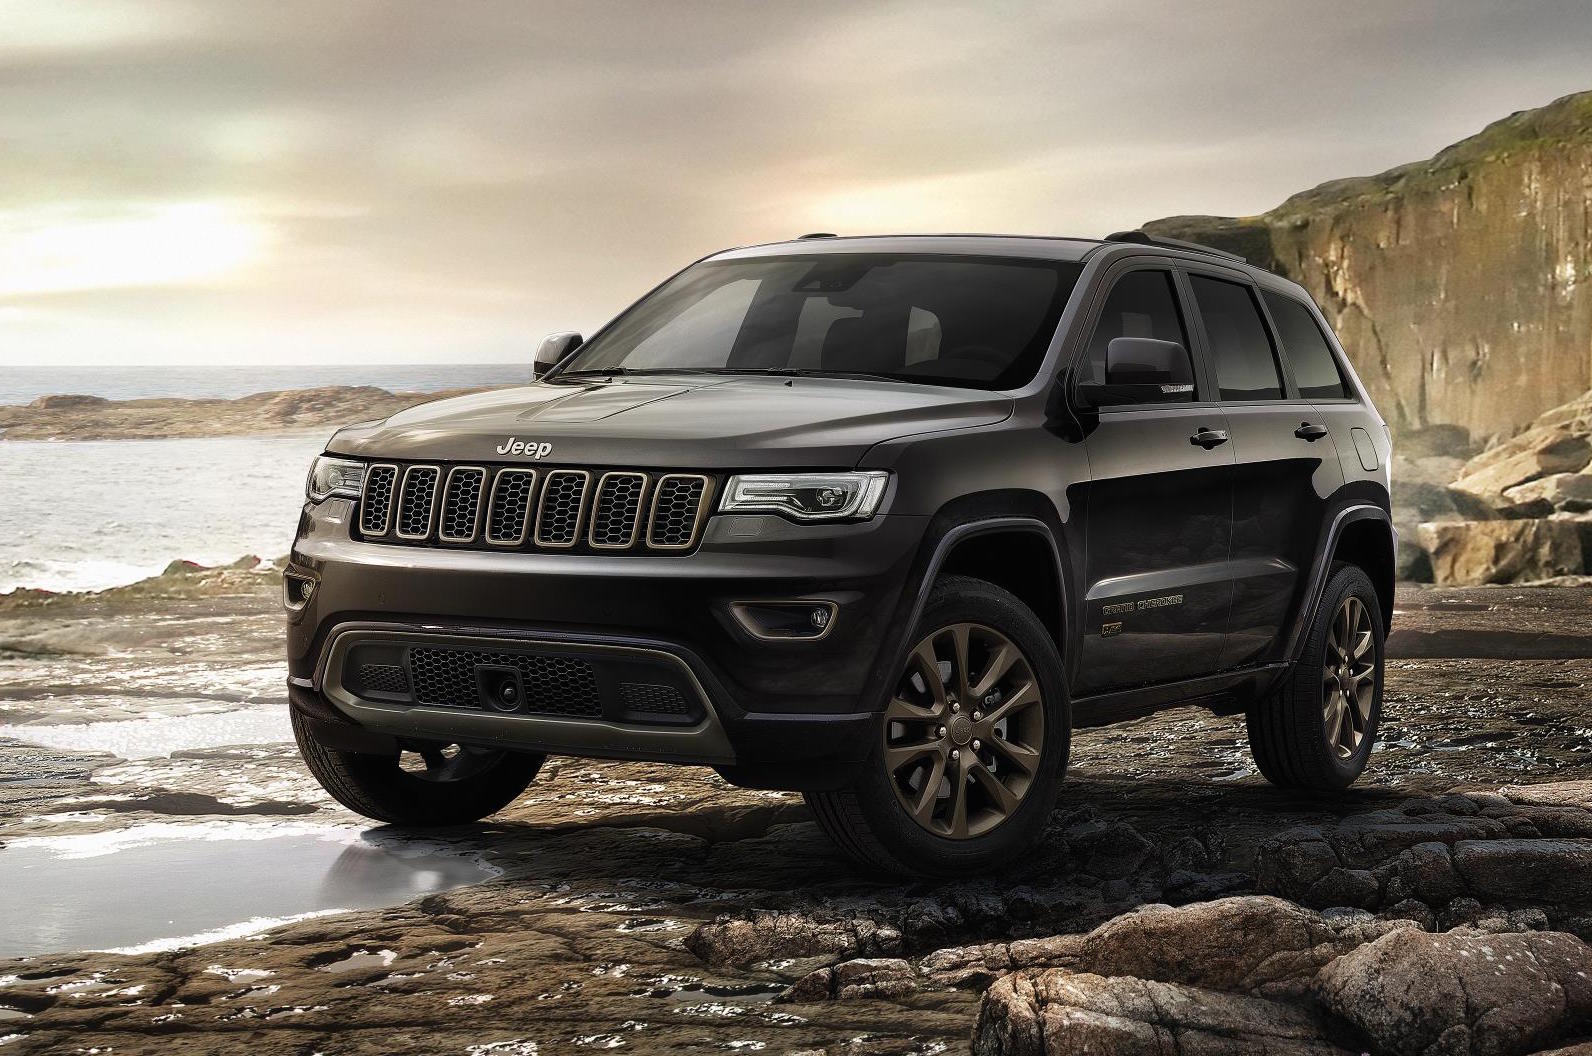 2017 Jeep Grand Cherokee gets new shifter, electric steering, stop